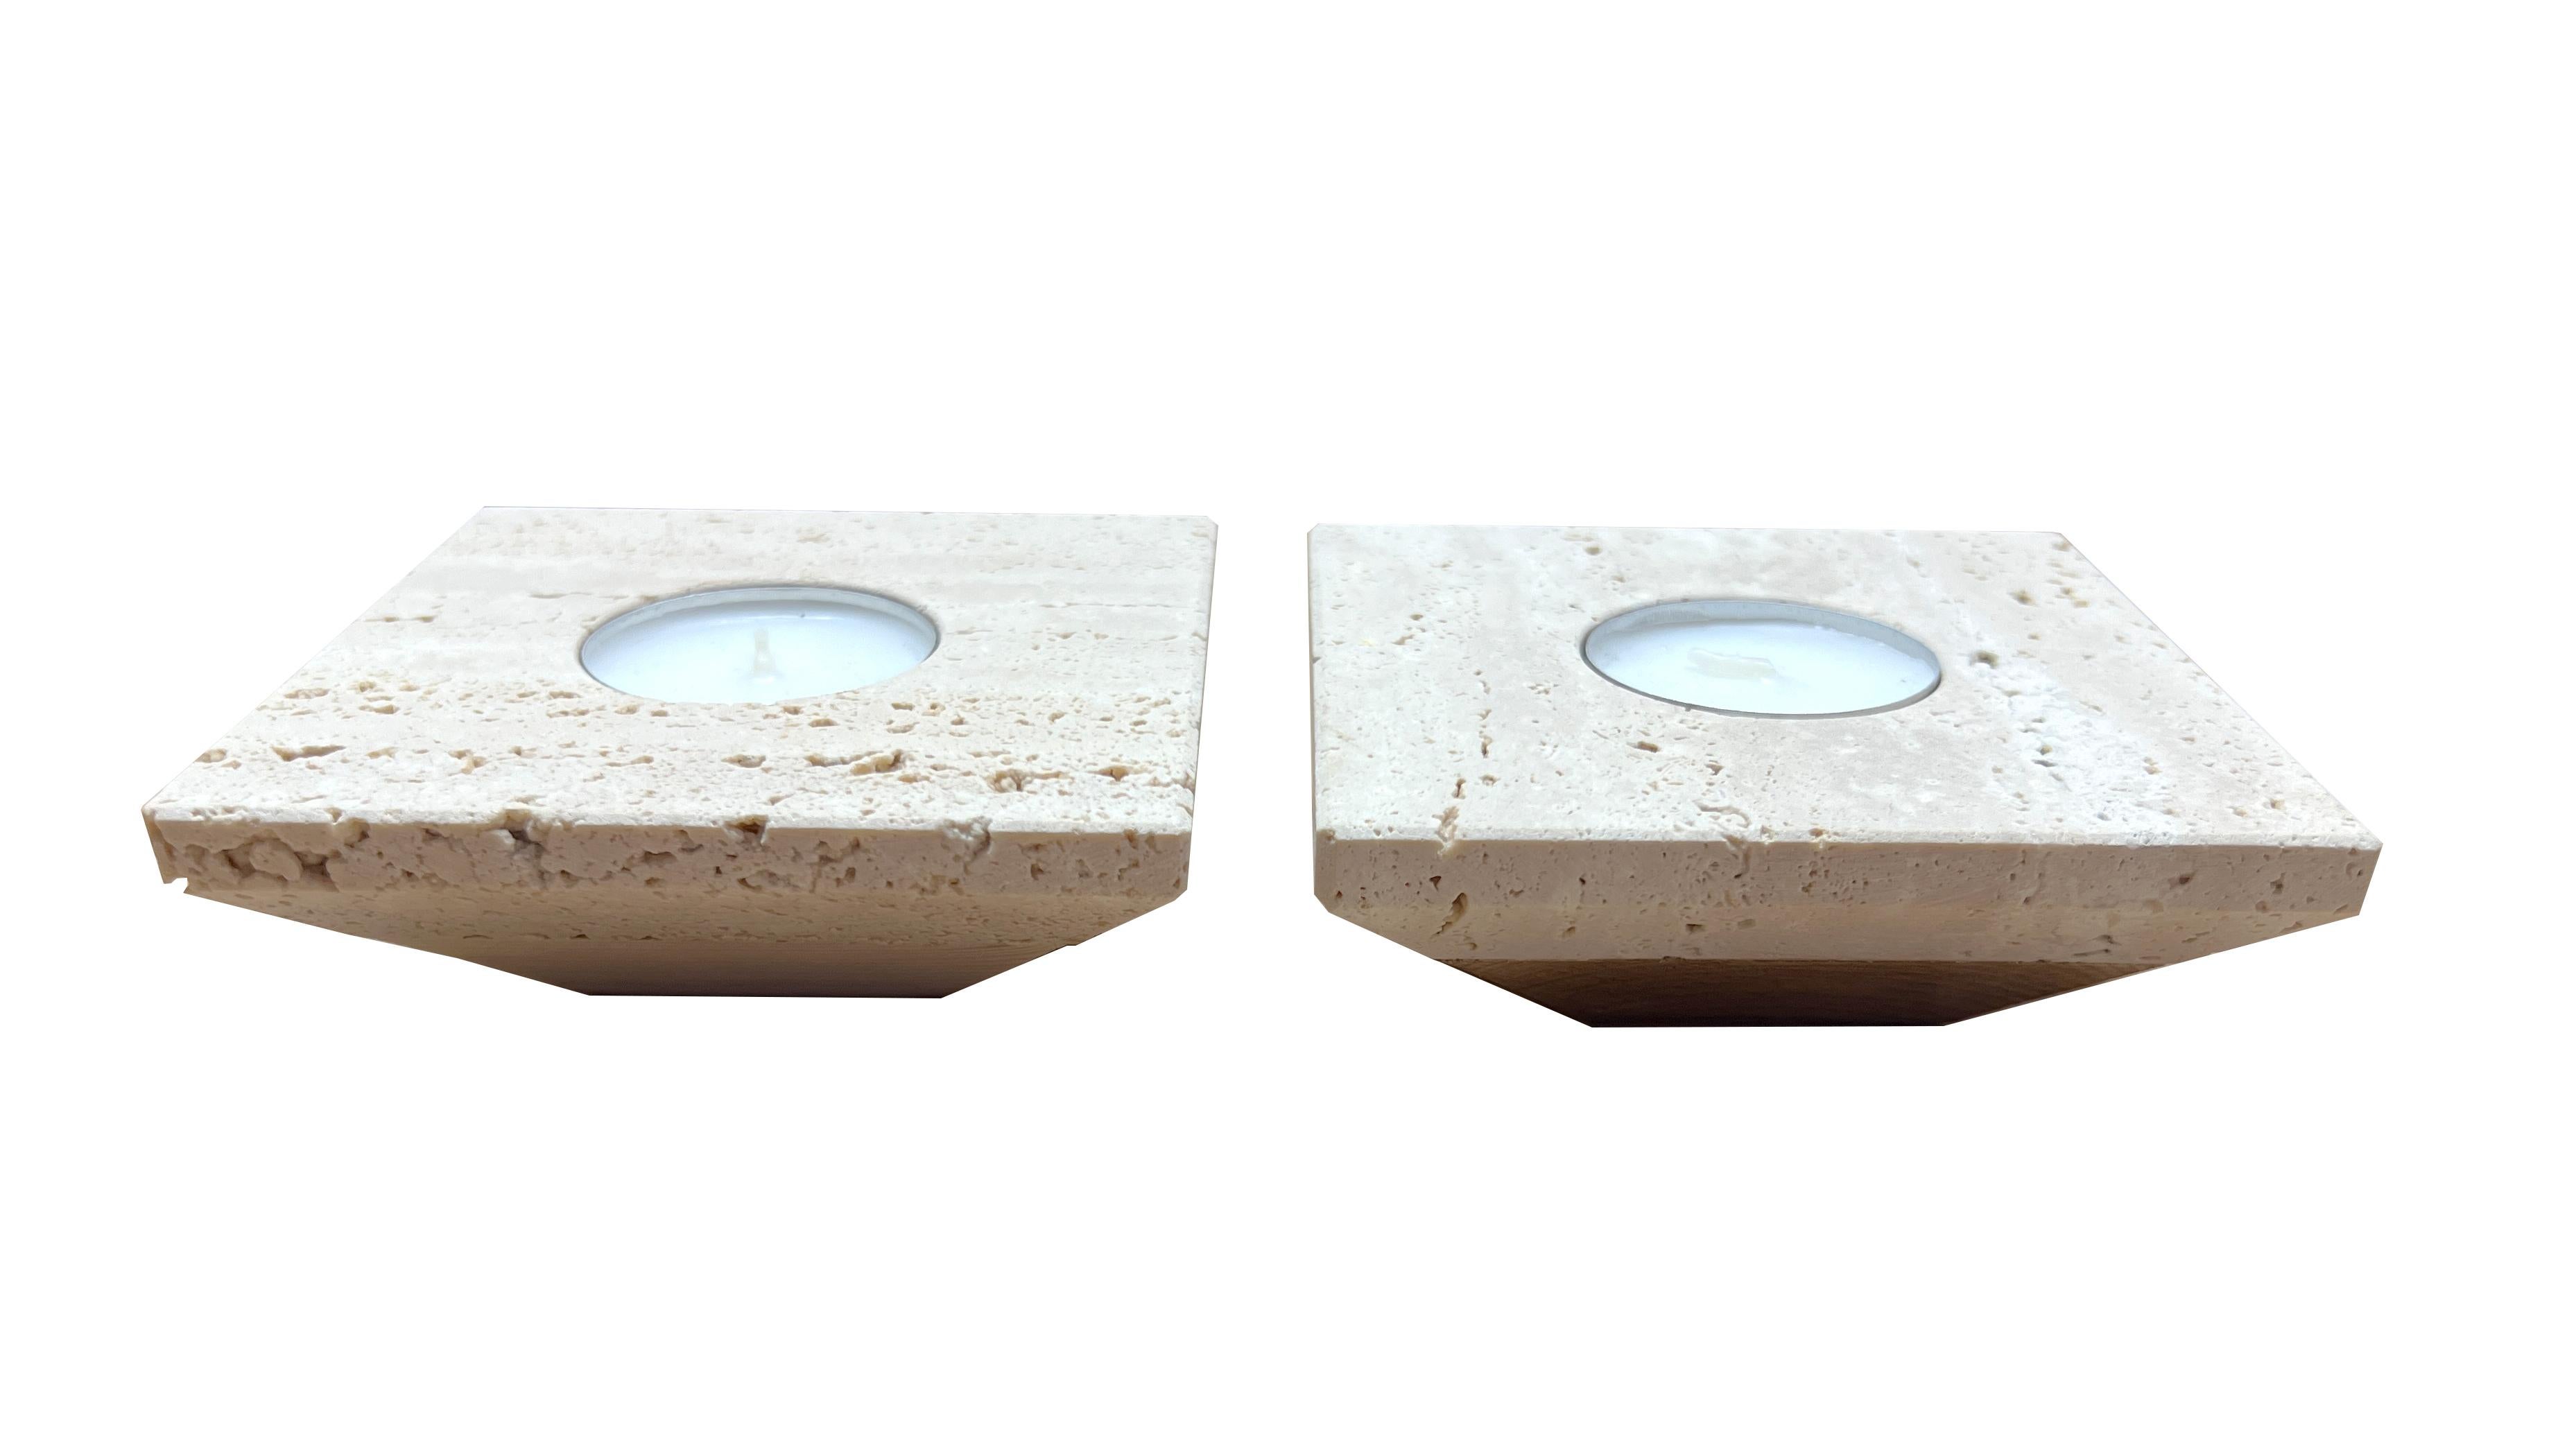 Candleholders Marble Travertine Design Set Two Candle Holders Mother’s Day Gift.
Immerse yourself in timeless elegance with our travertine marble candle holders, a perfect fusion of natural beauty and refined functionality, designed to illuminate